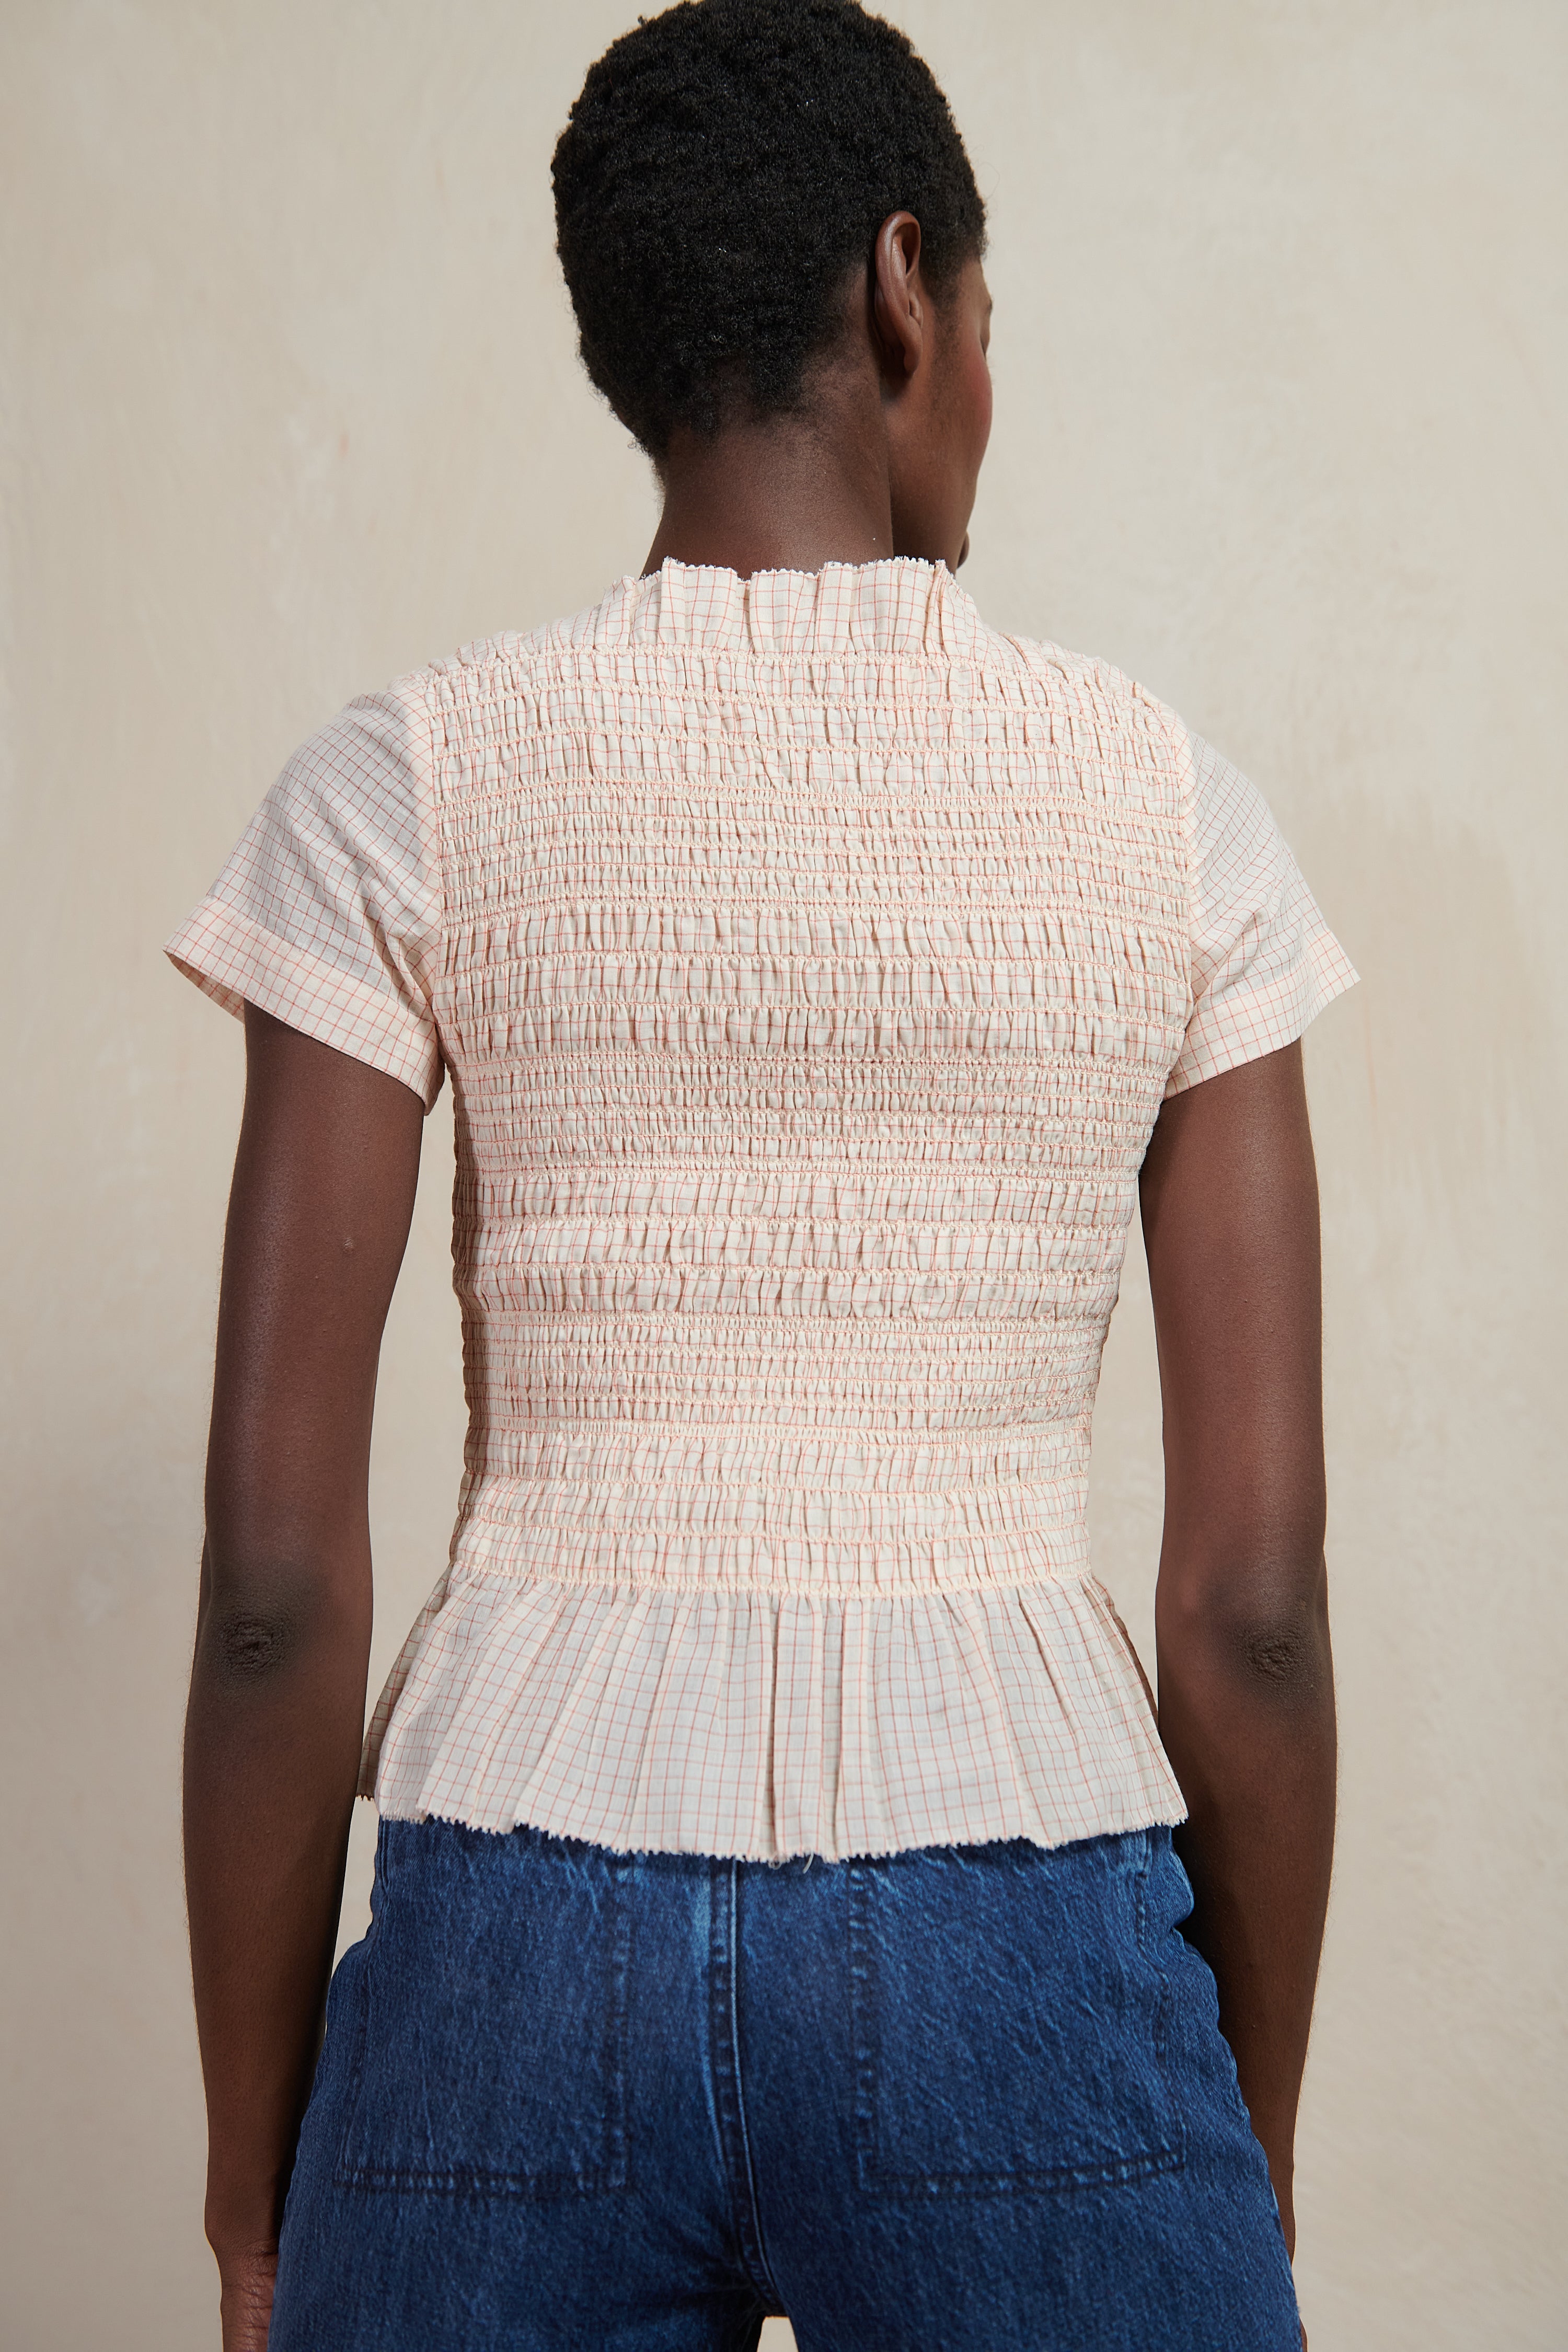 FERNE REVERSIBLE TOP 2.0 | piquillo check | organic + earth dyed